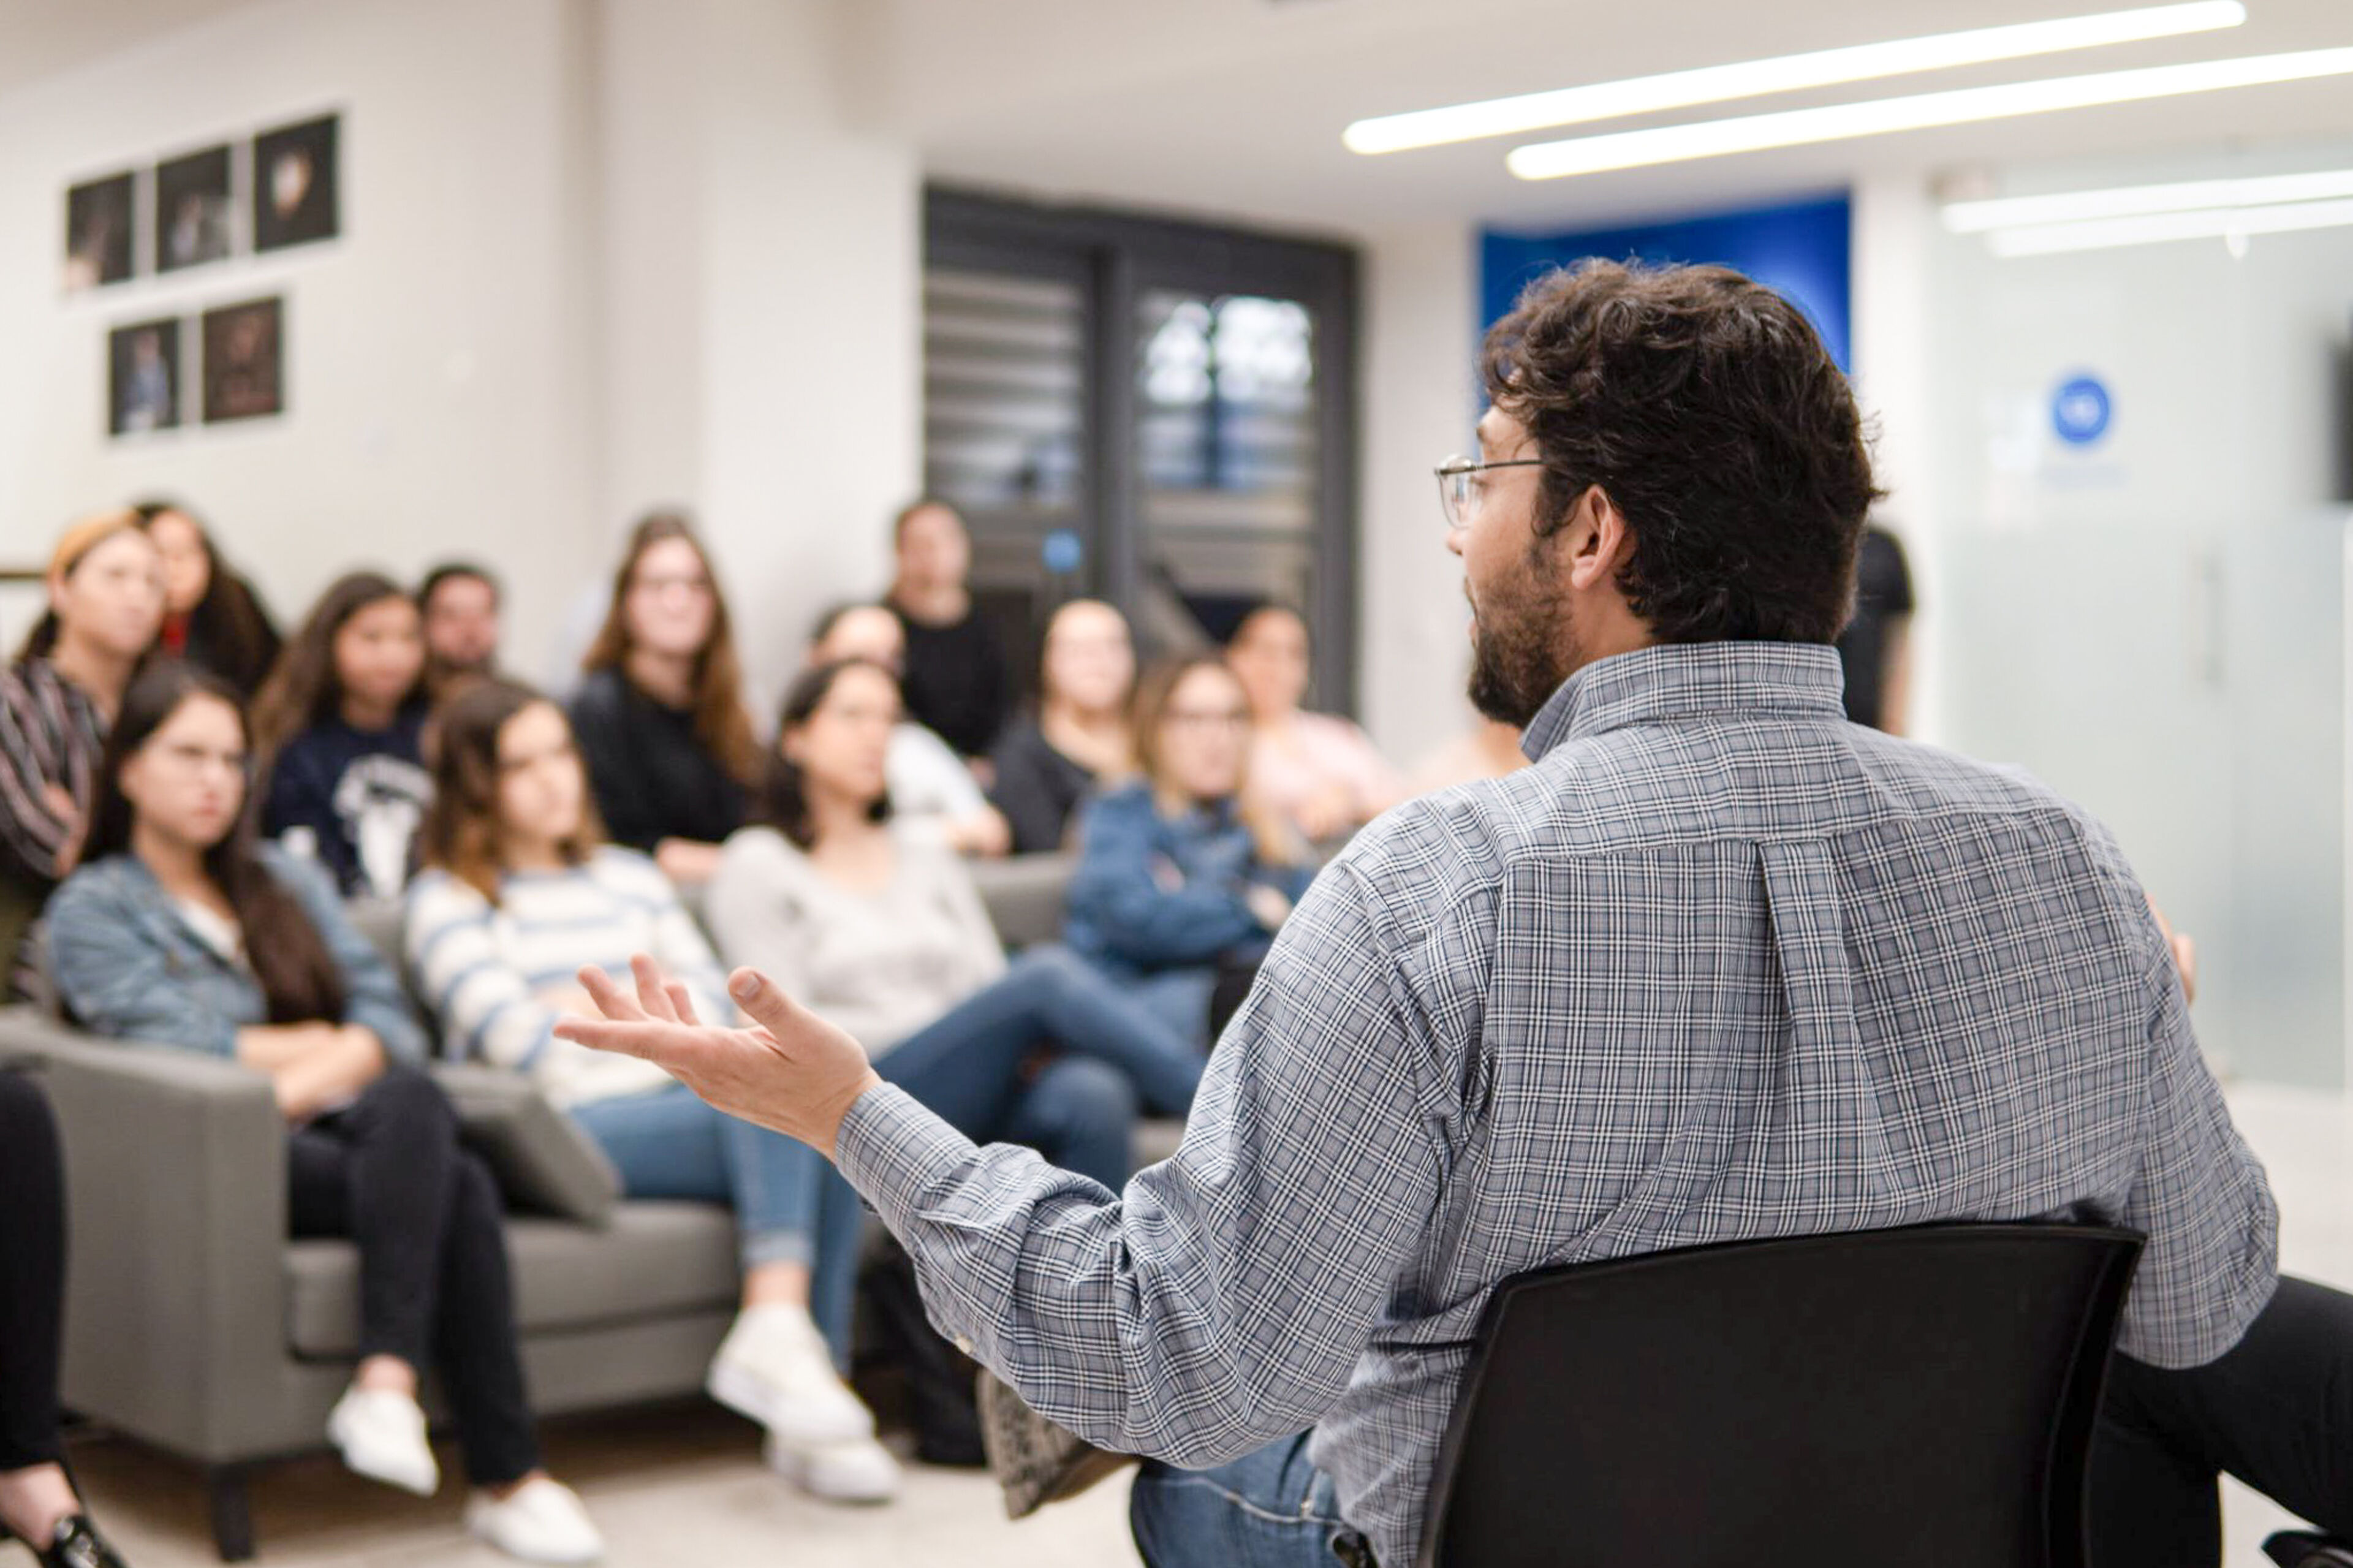 A speaker engages with an audience of attentive students in an educational setting.